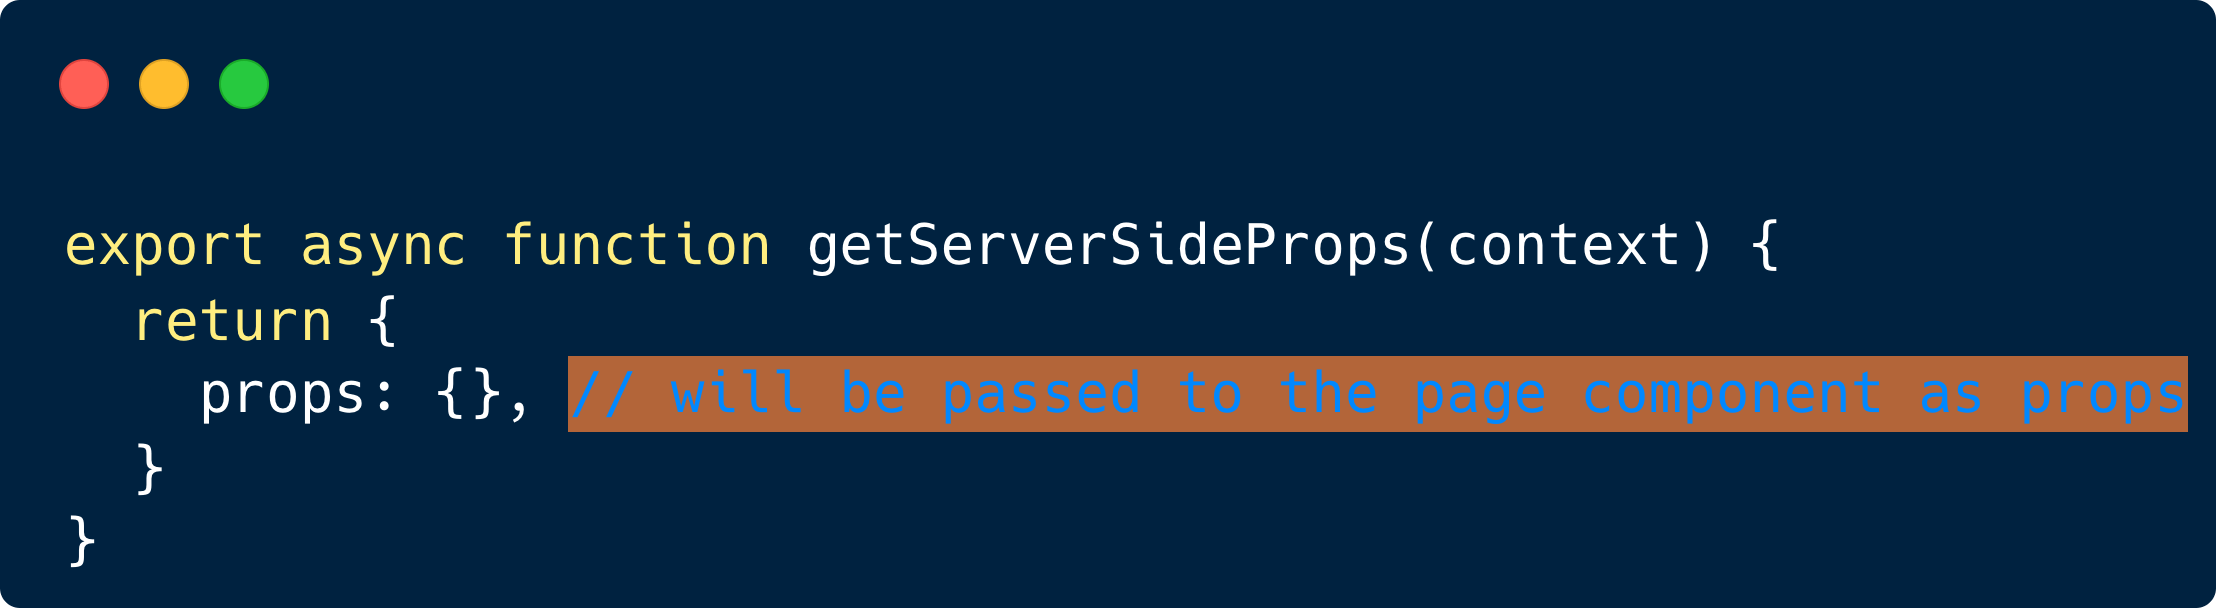 Example of getServerSideProps from Next.js docs